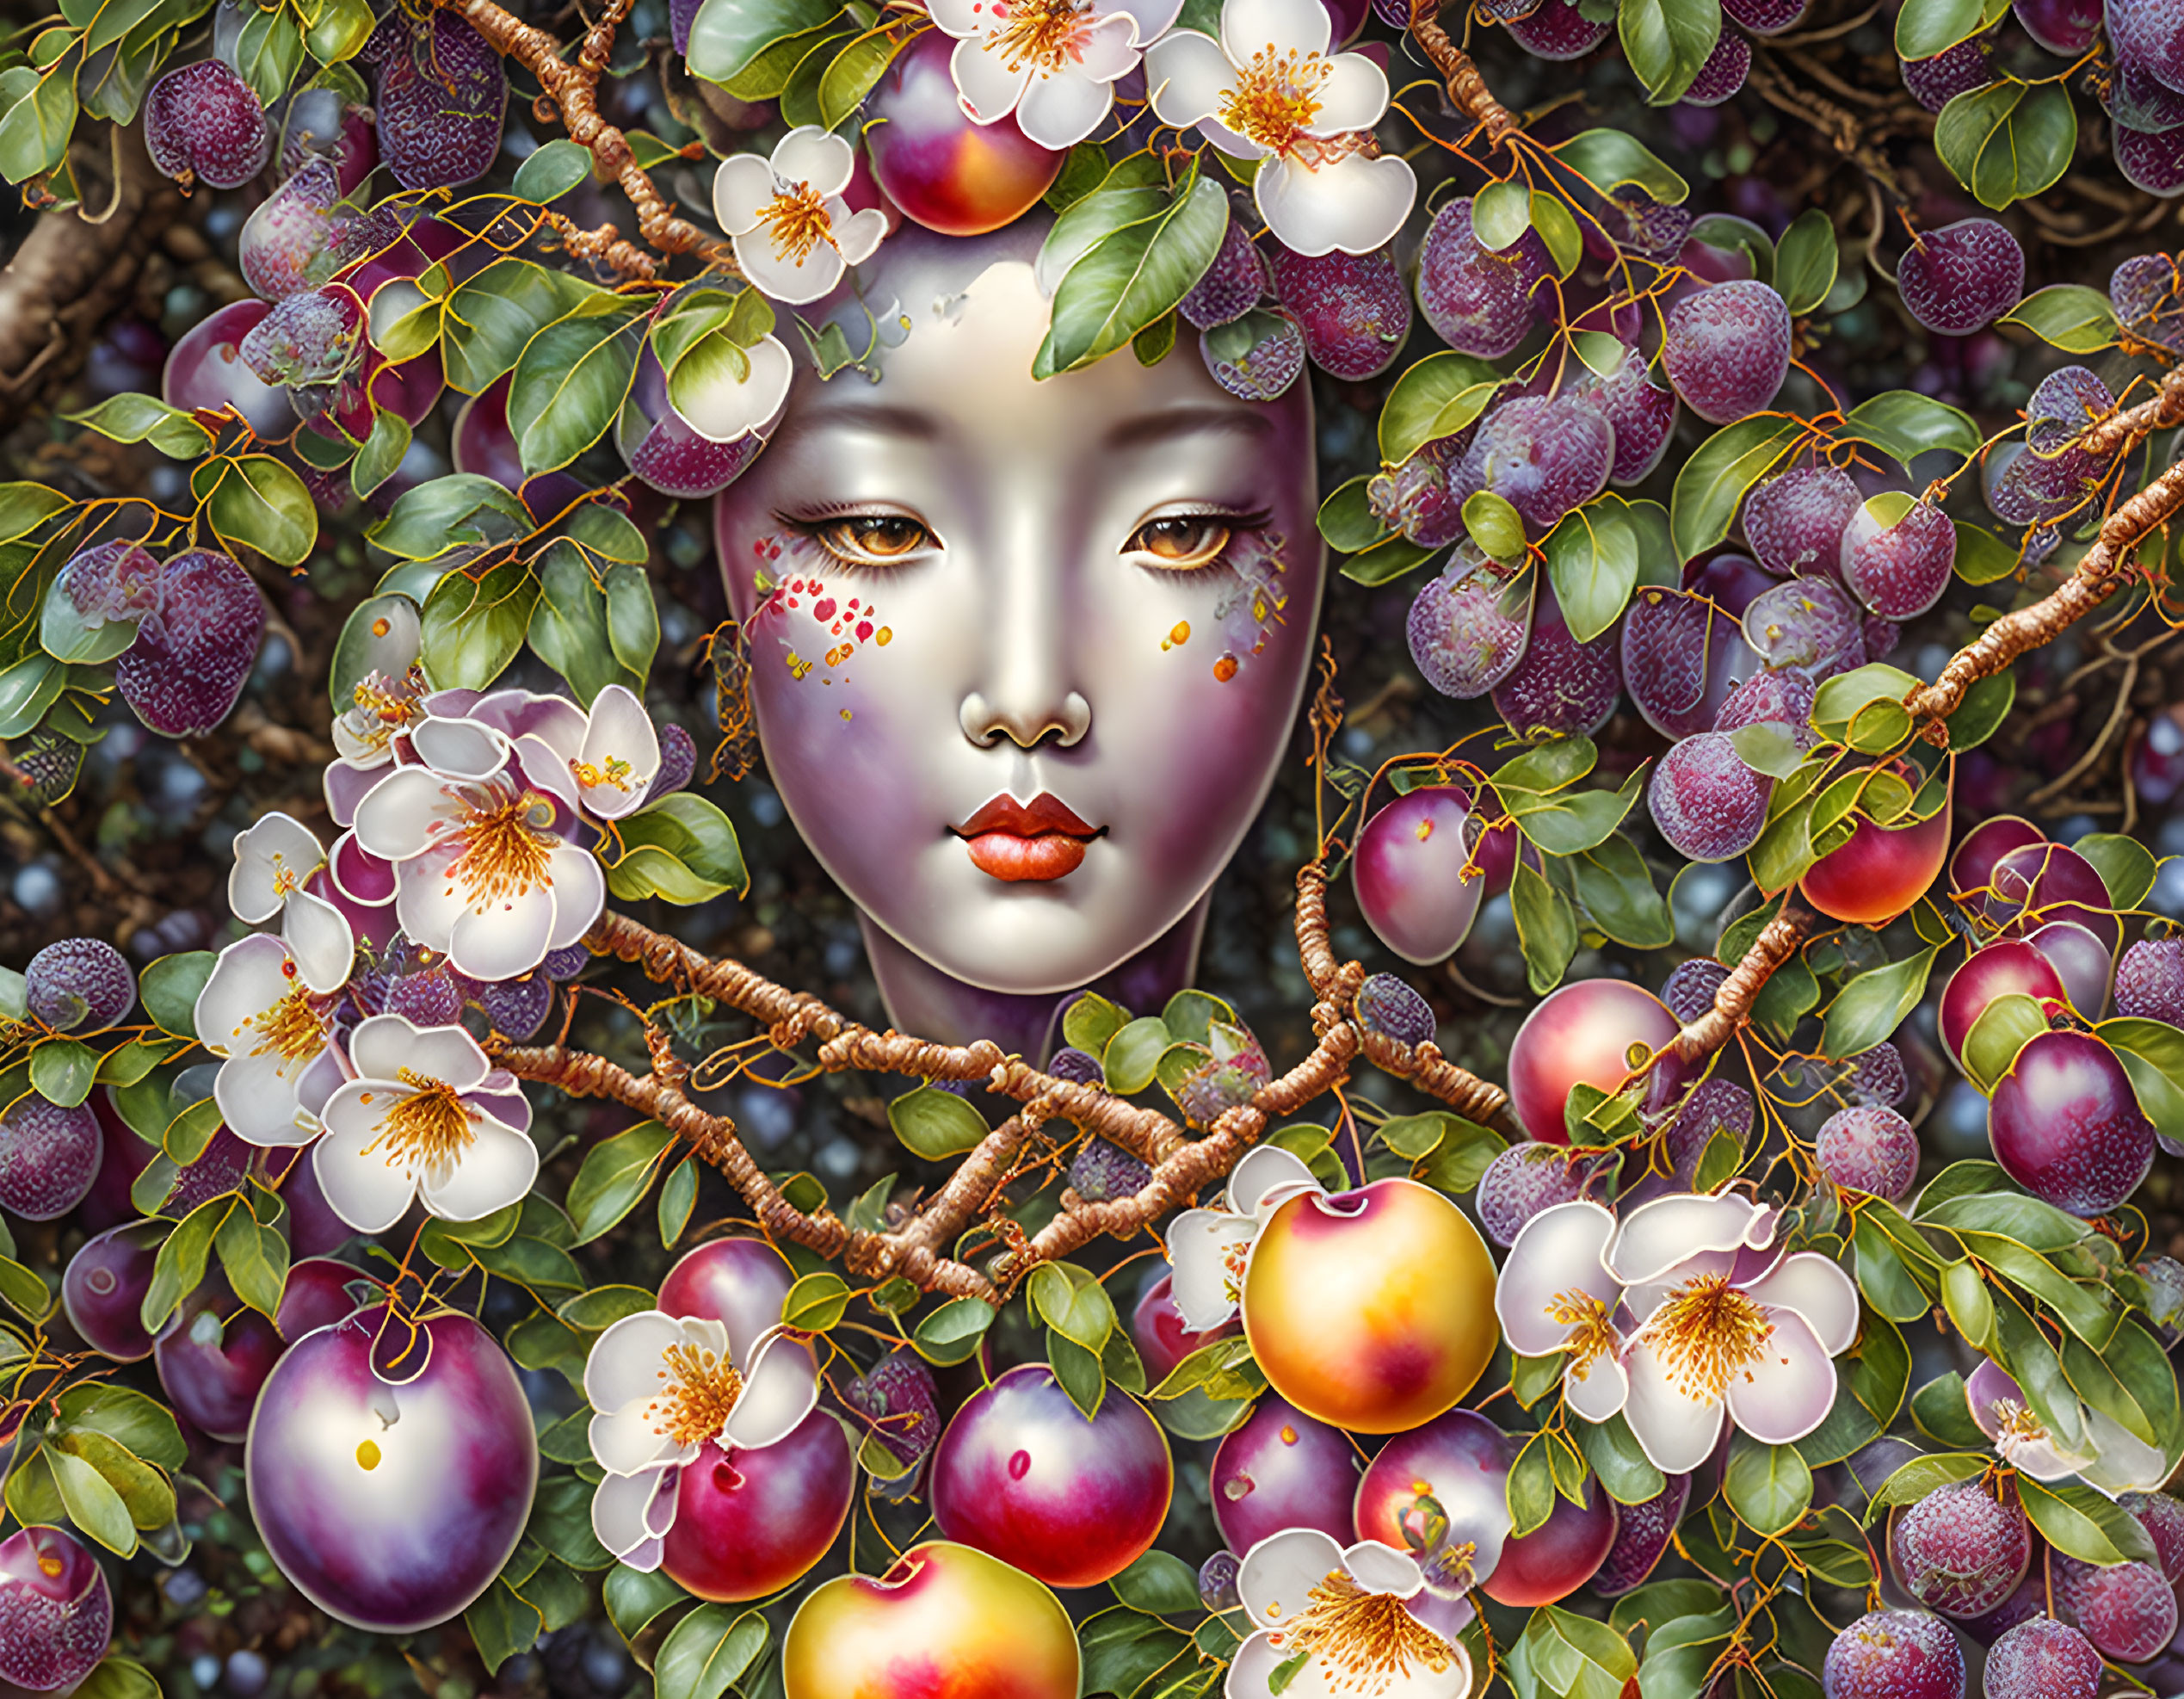 Surreal portrait: Woman's face merges with ripe plums and blooming flowers